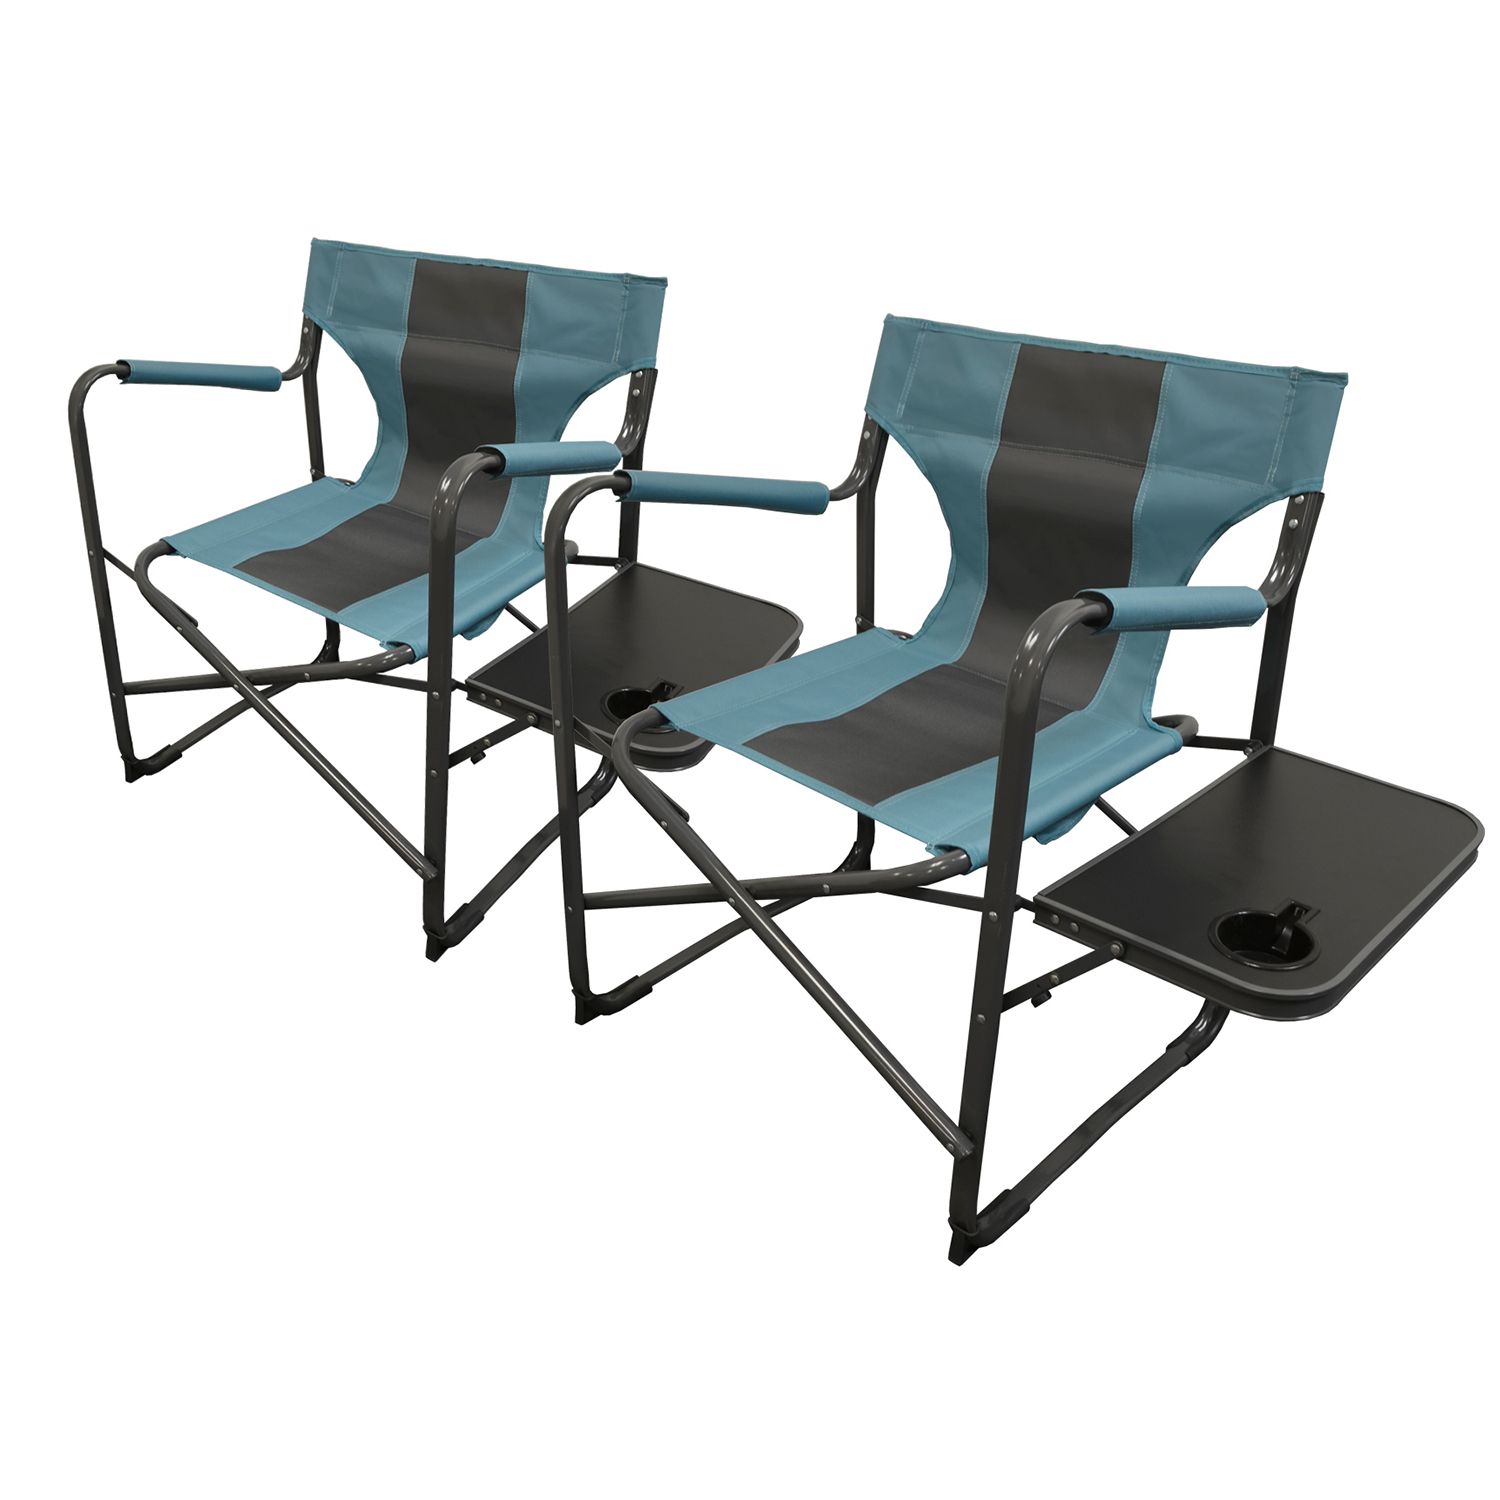 Elite Director's Folding Chair, 2 Pack With Regard To Trendy Garden Oversized Chairs With Sunshade And Drink Tray (View 25 of 25)